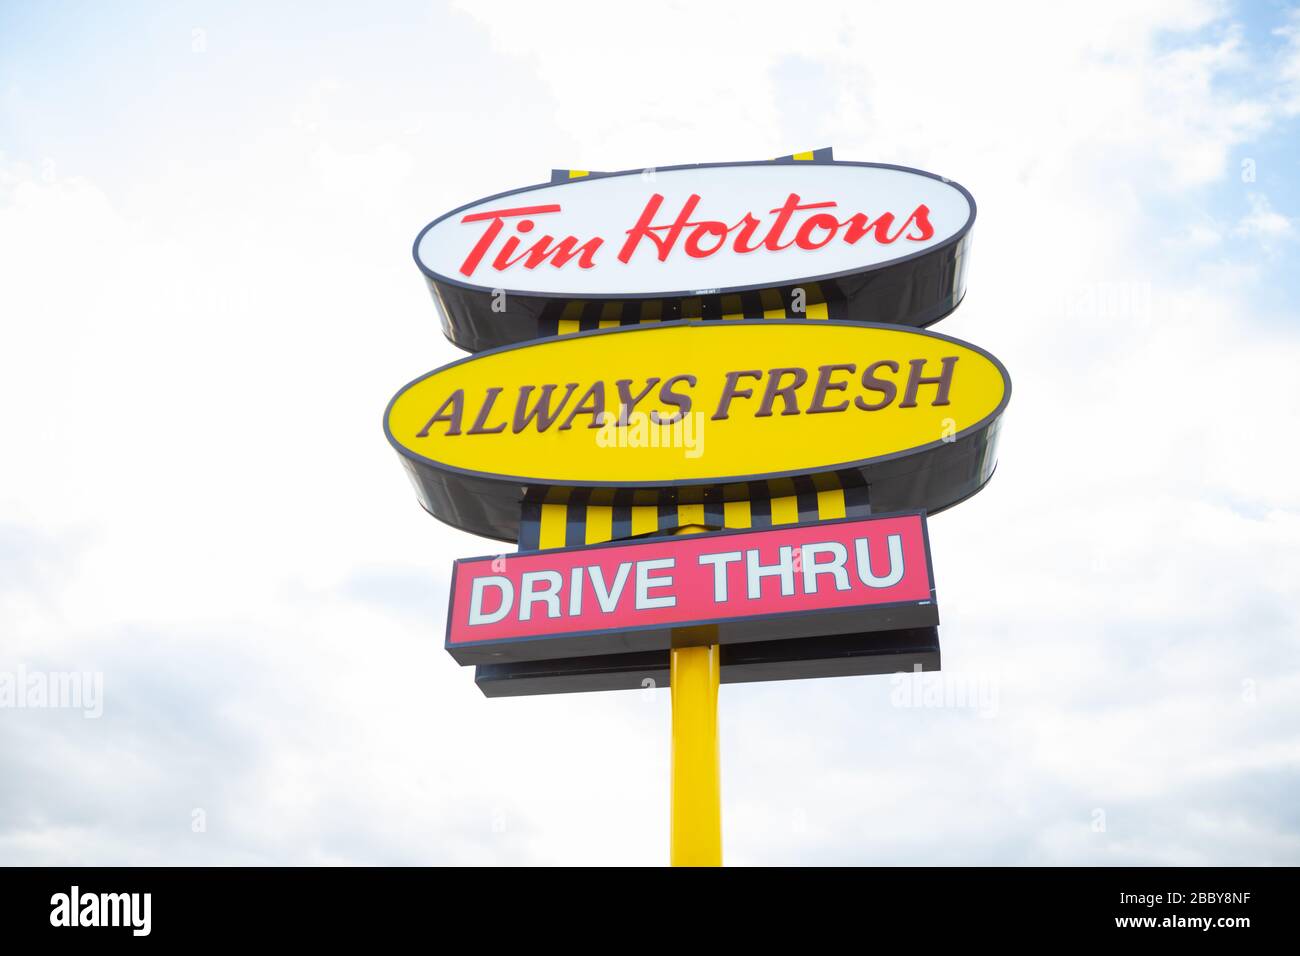 Sign showing Tim Hortons fast food restaurant logo and slogan with sky background Stock Photo